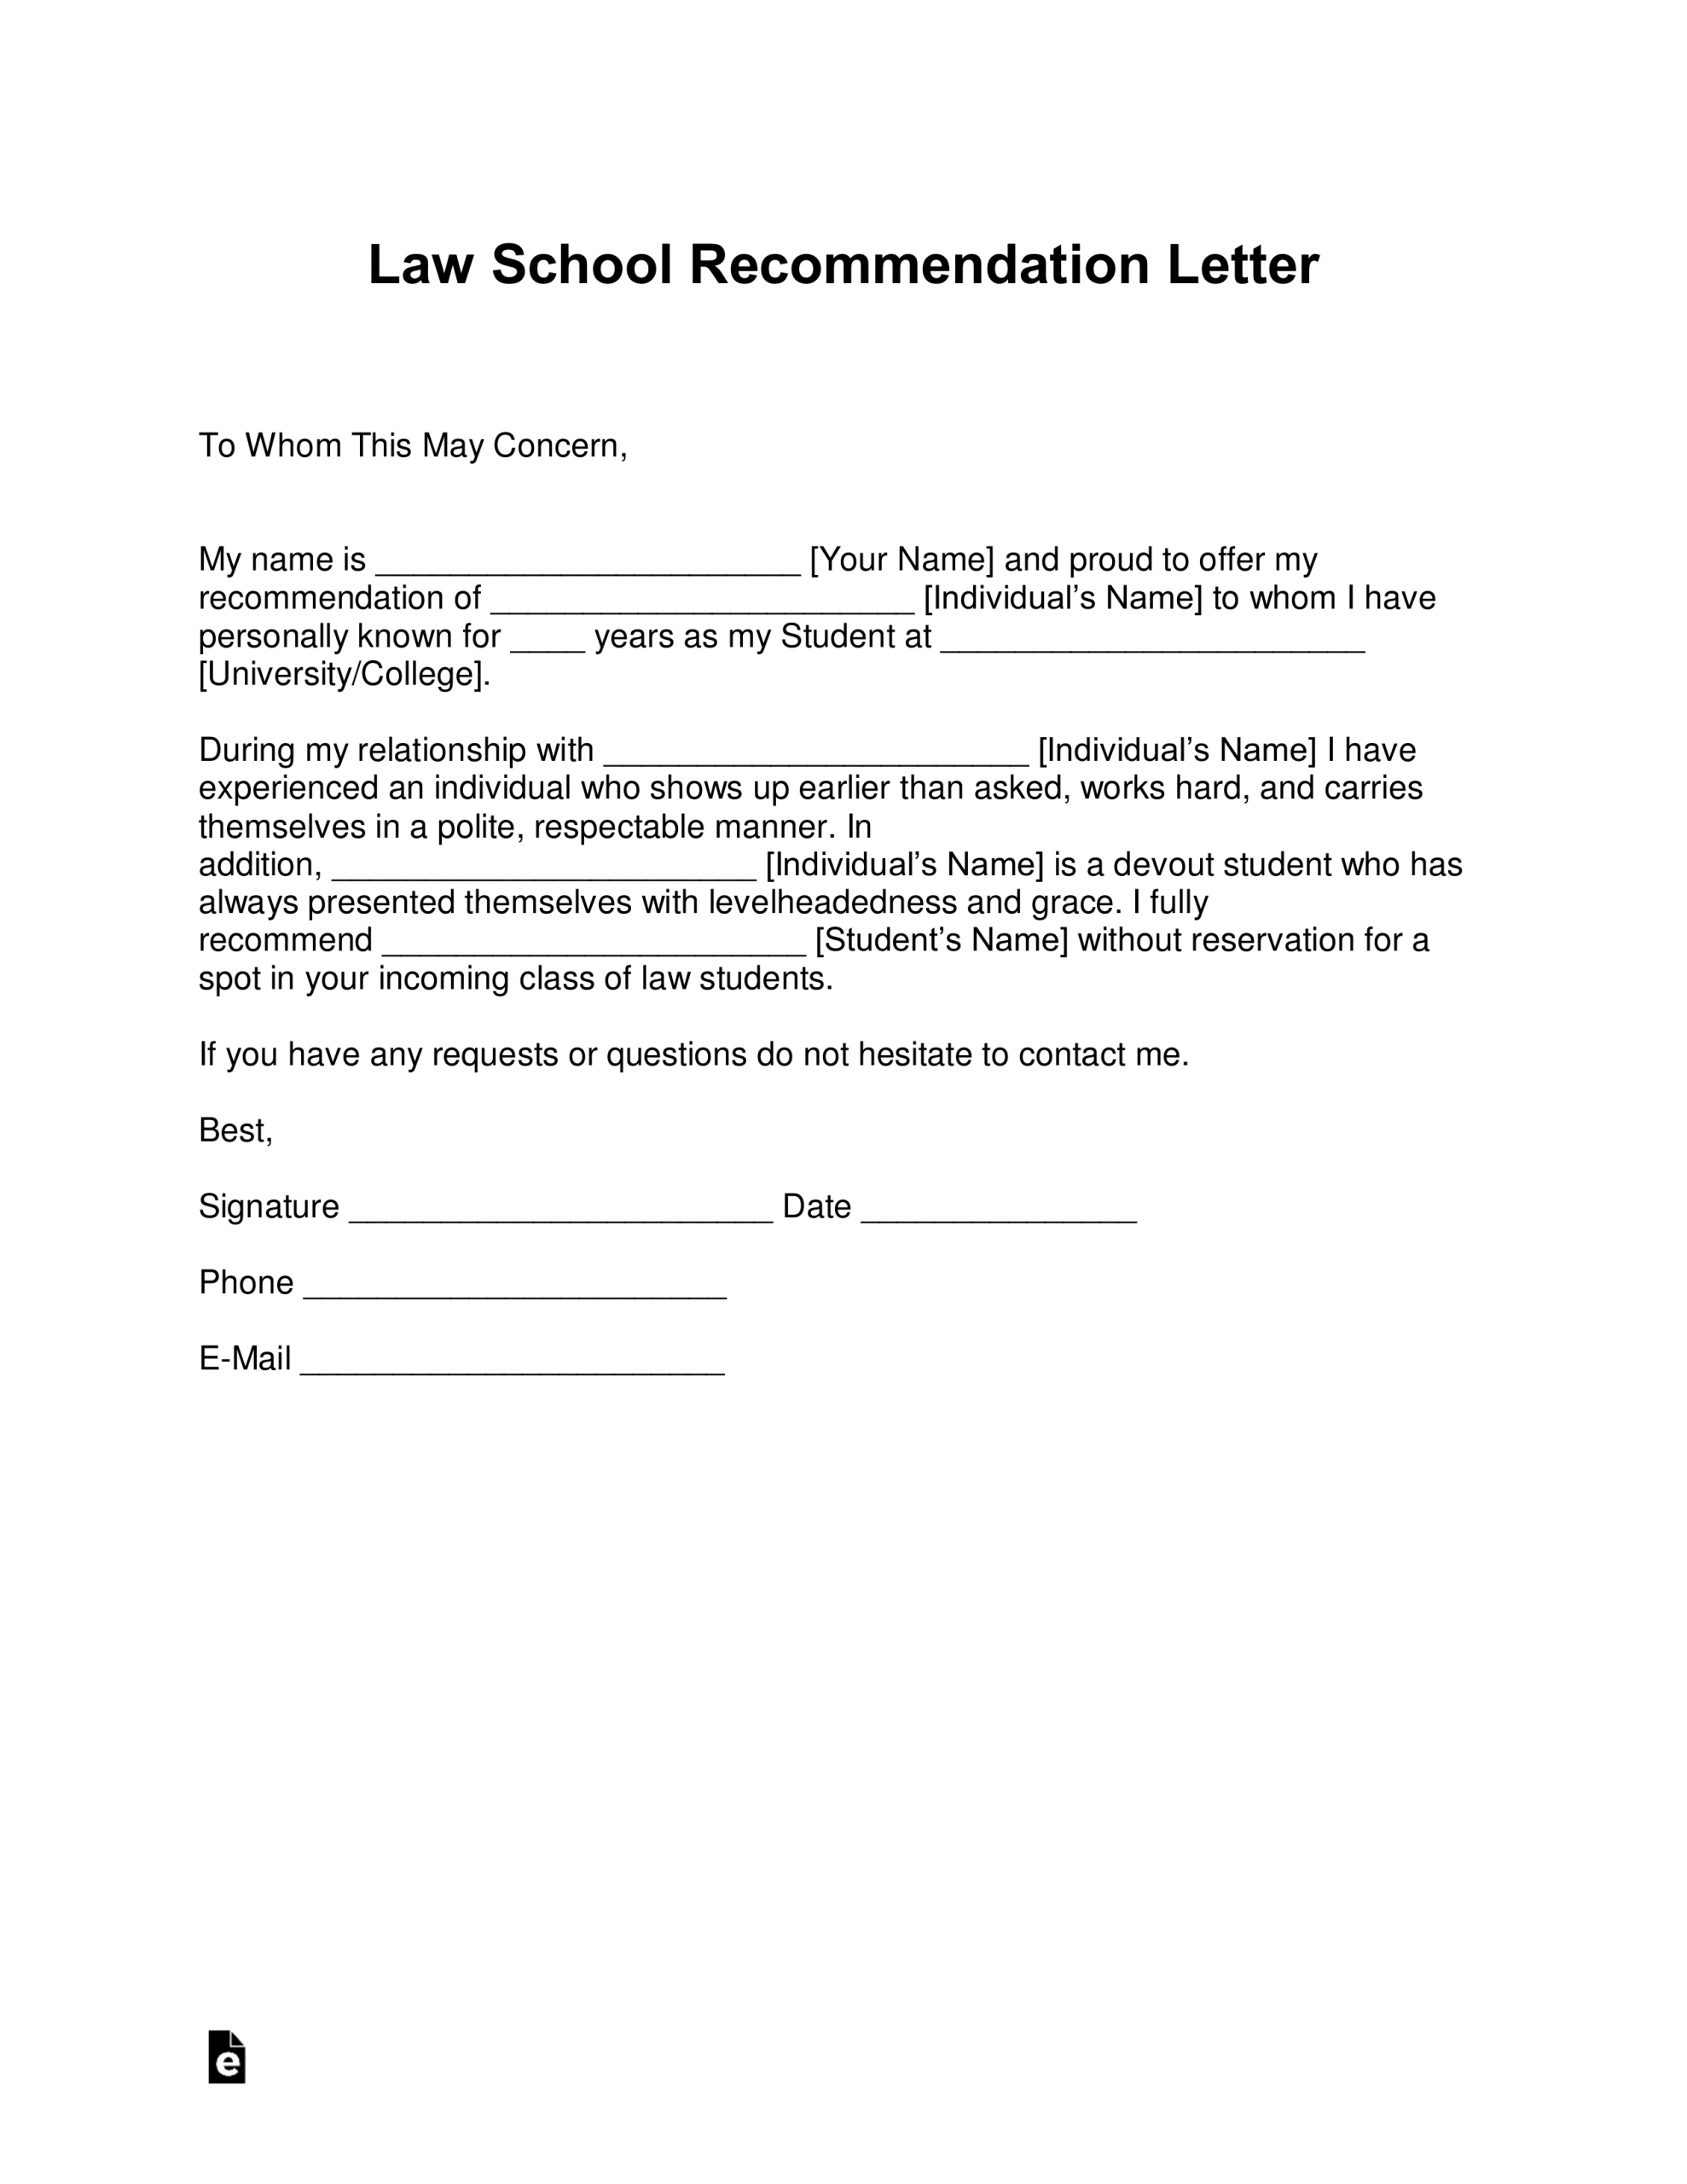 Free Law School Recommendation Letter Templates With pertaining to dimensions 2550 X 3301